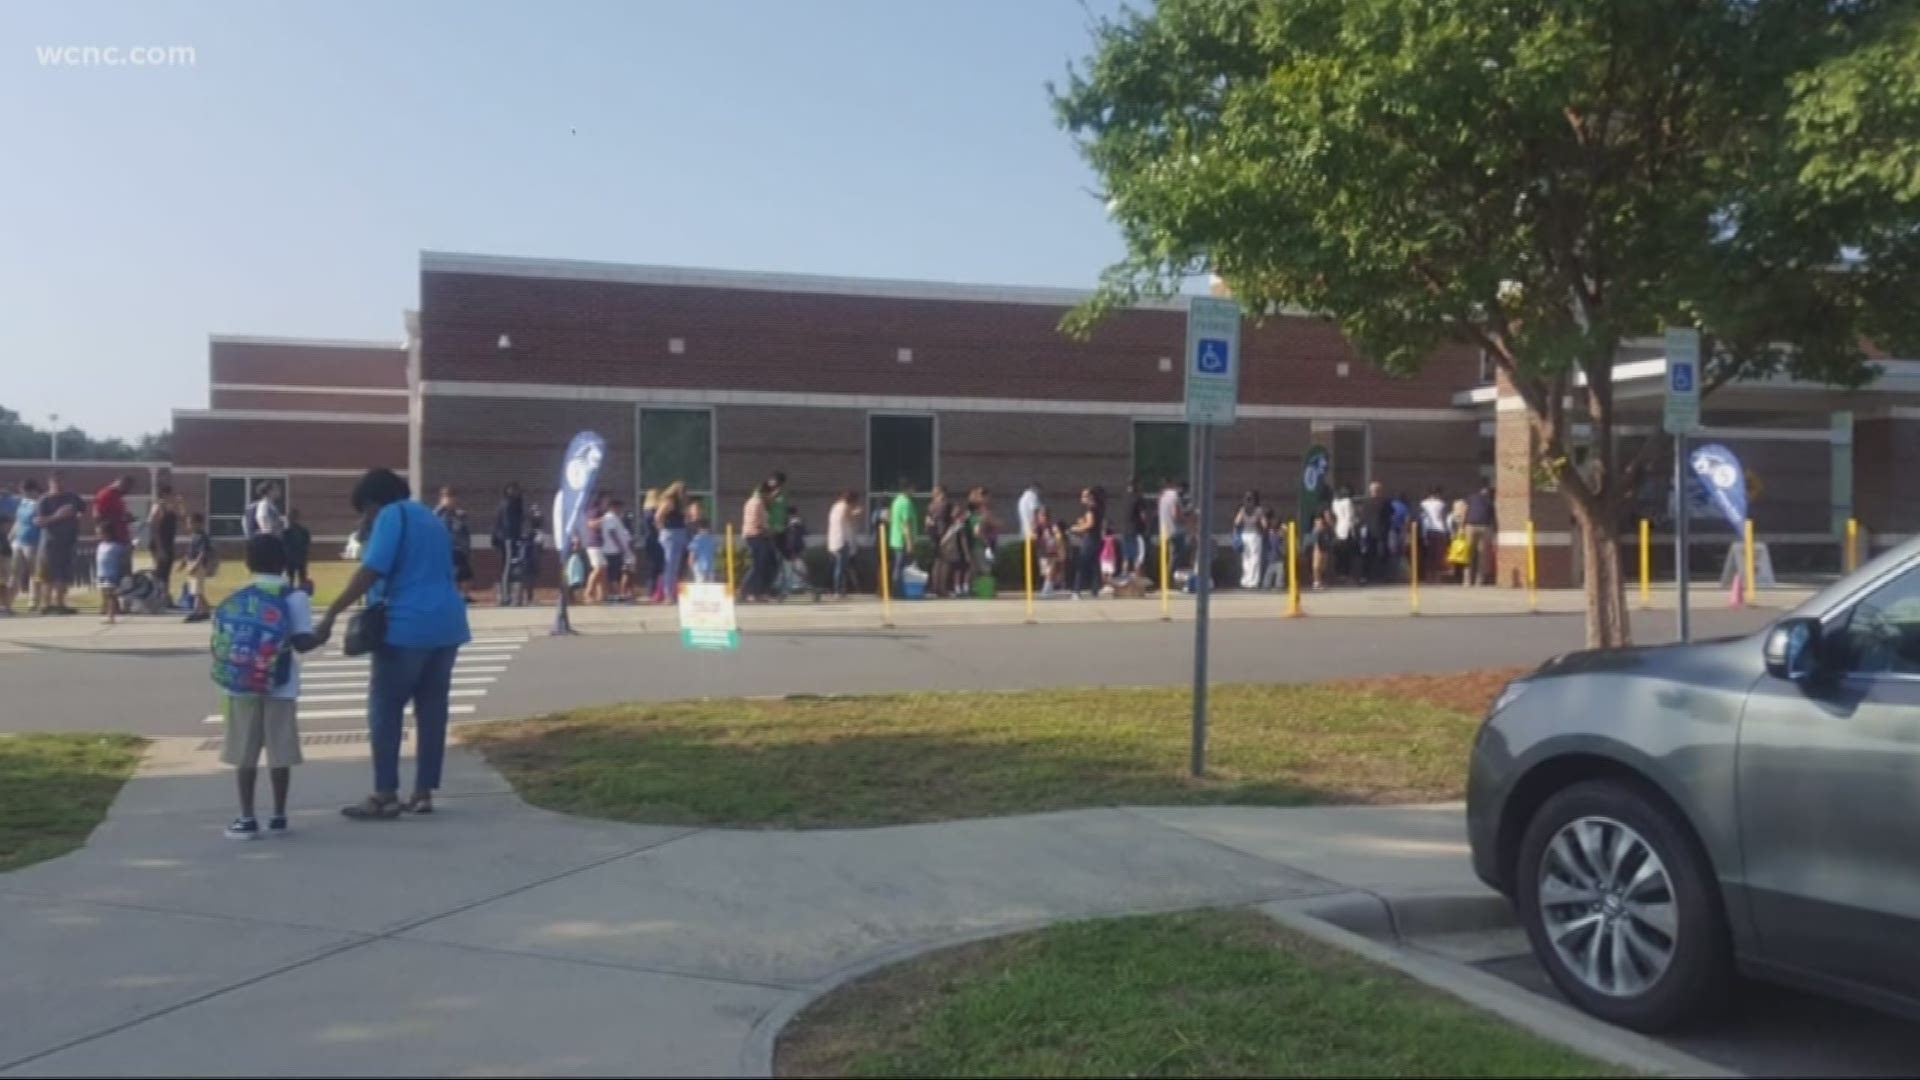 You might remember the first day of school when lines wrapped around school buildings because of the new procedure.